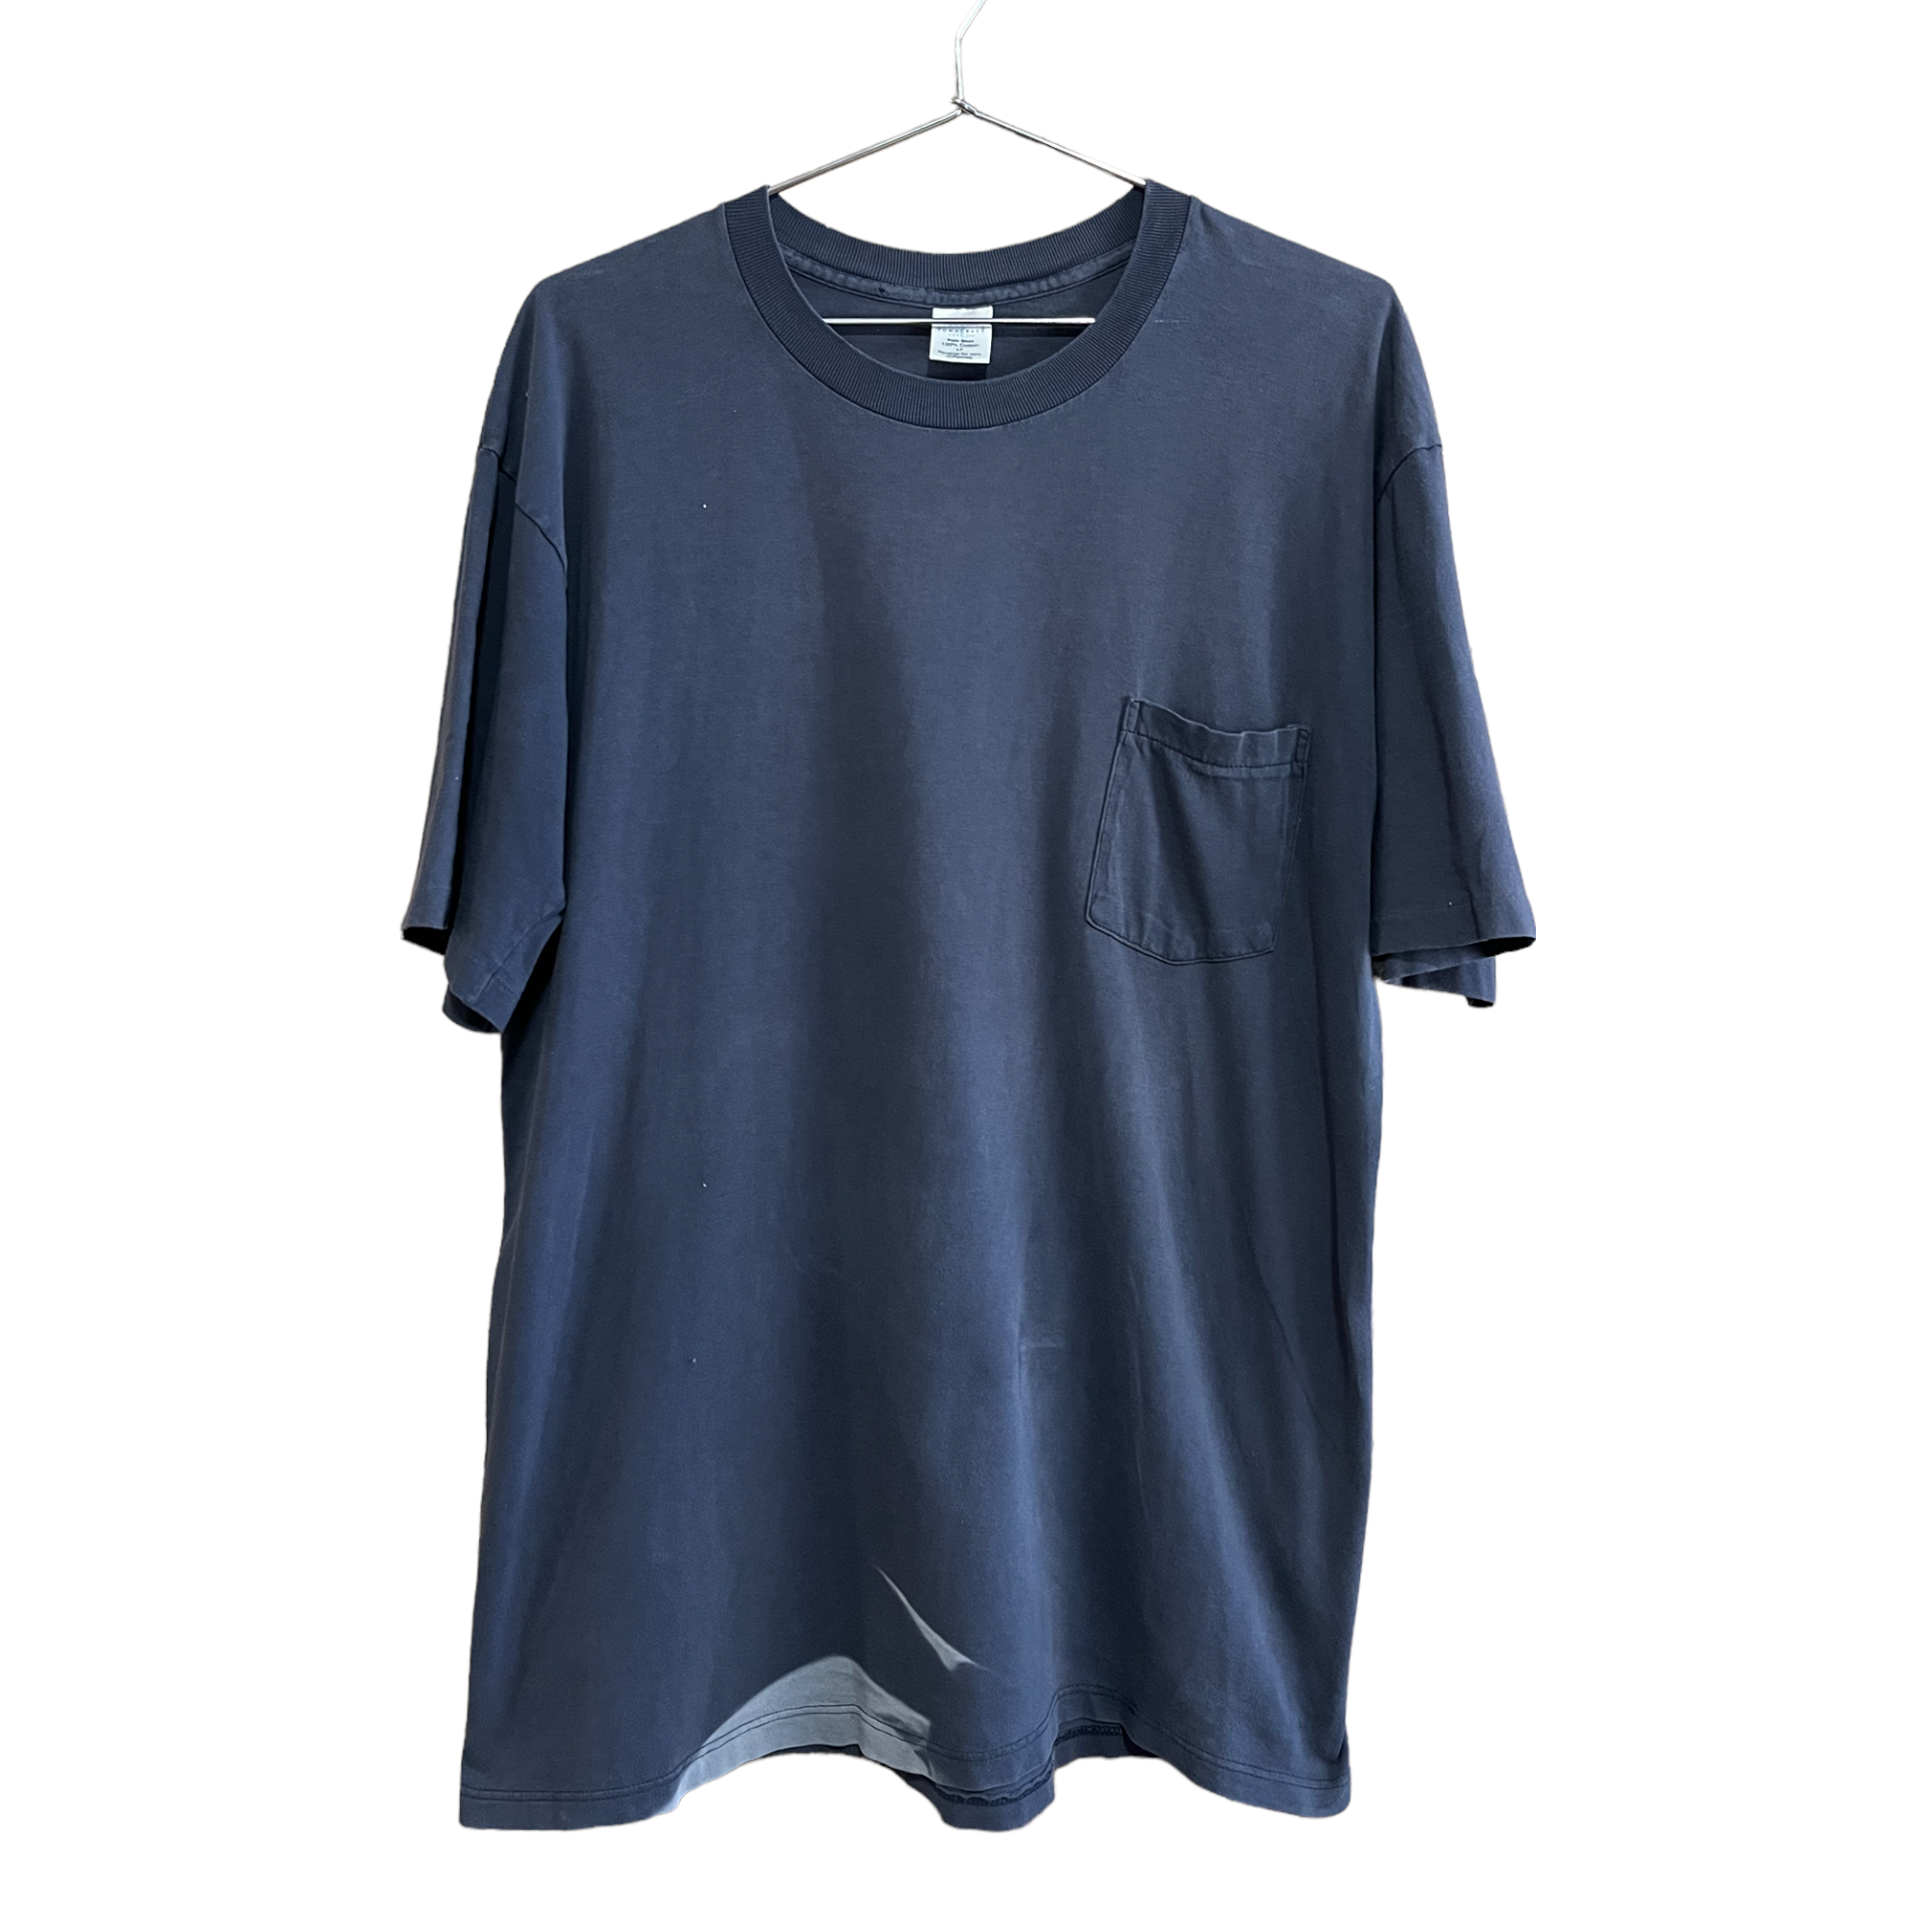 90s Faded Pocket Tee With Sun Fading - Faded Navy - L